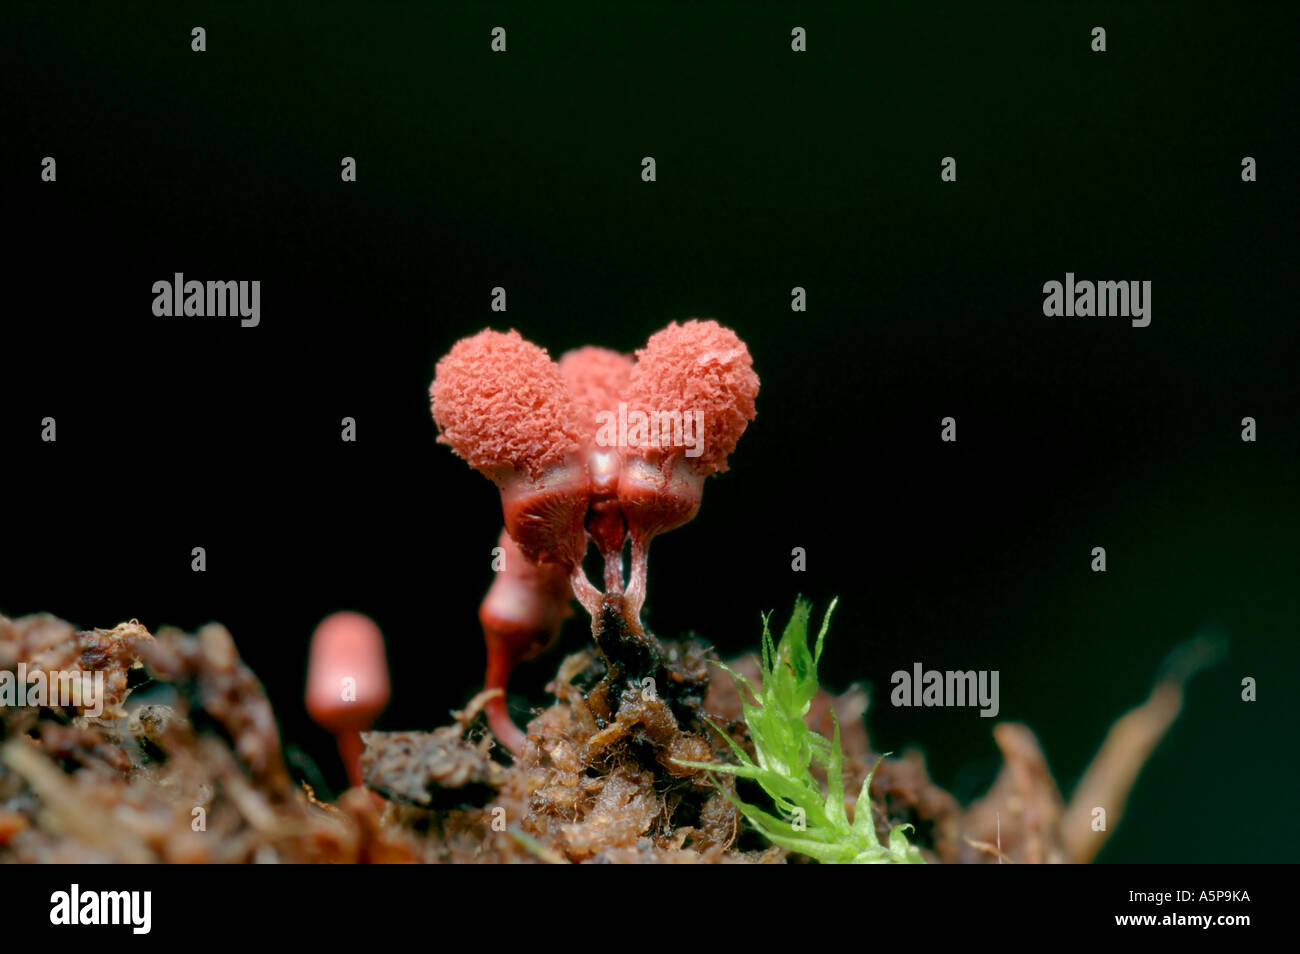 Bright red immature stalked fruiting bodies of slime mould myxomycete Arcyria denudata growing on the wood Stock Photo